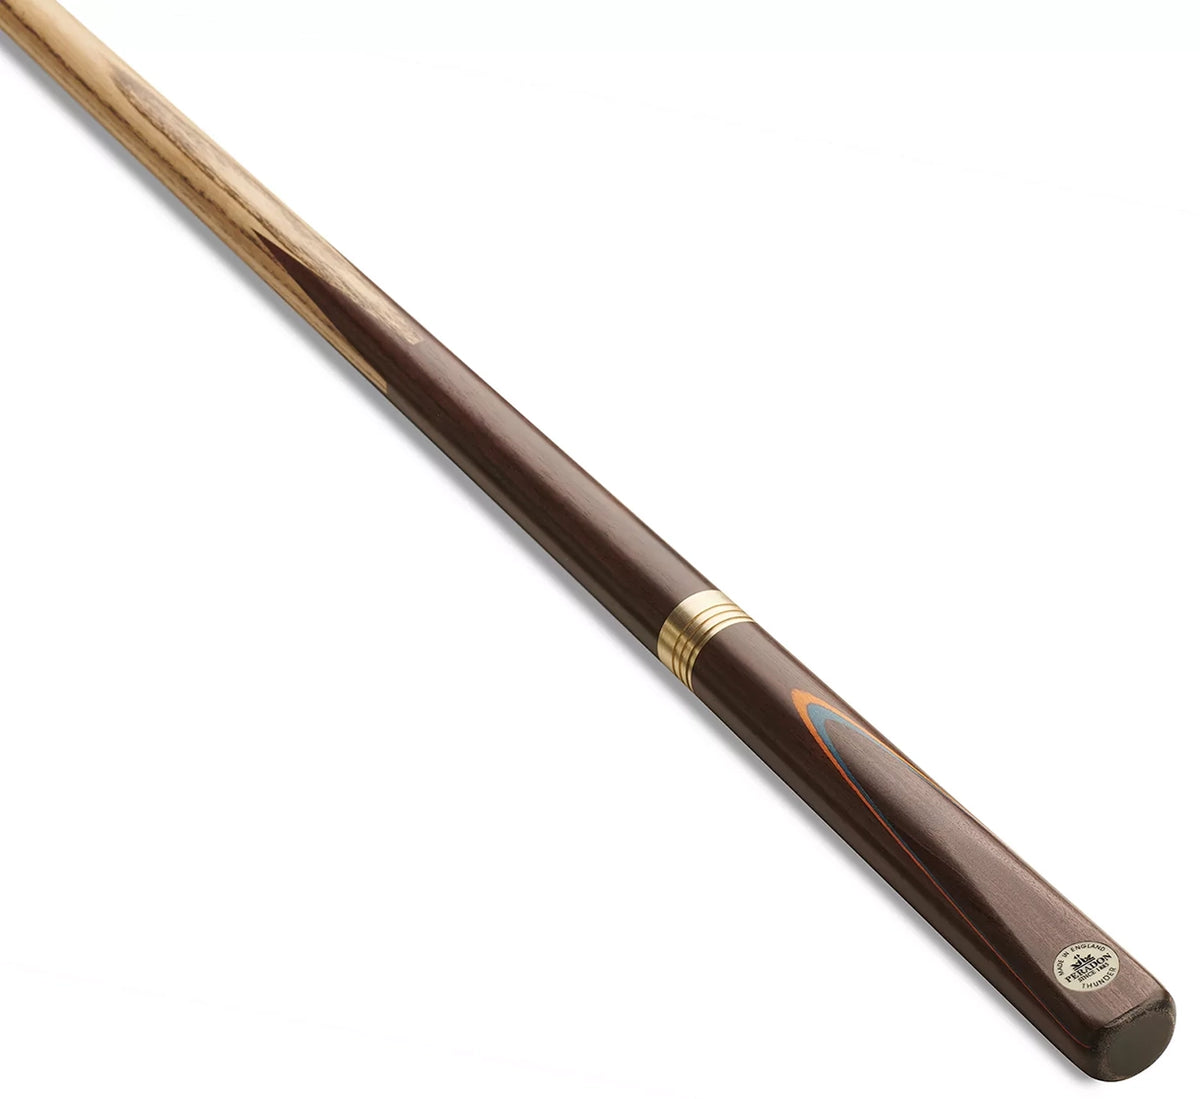 Peradon Thunder 3 Section 8-Ball Pool Cue. On angle view